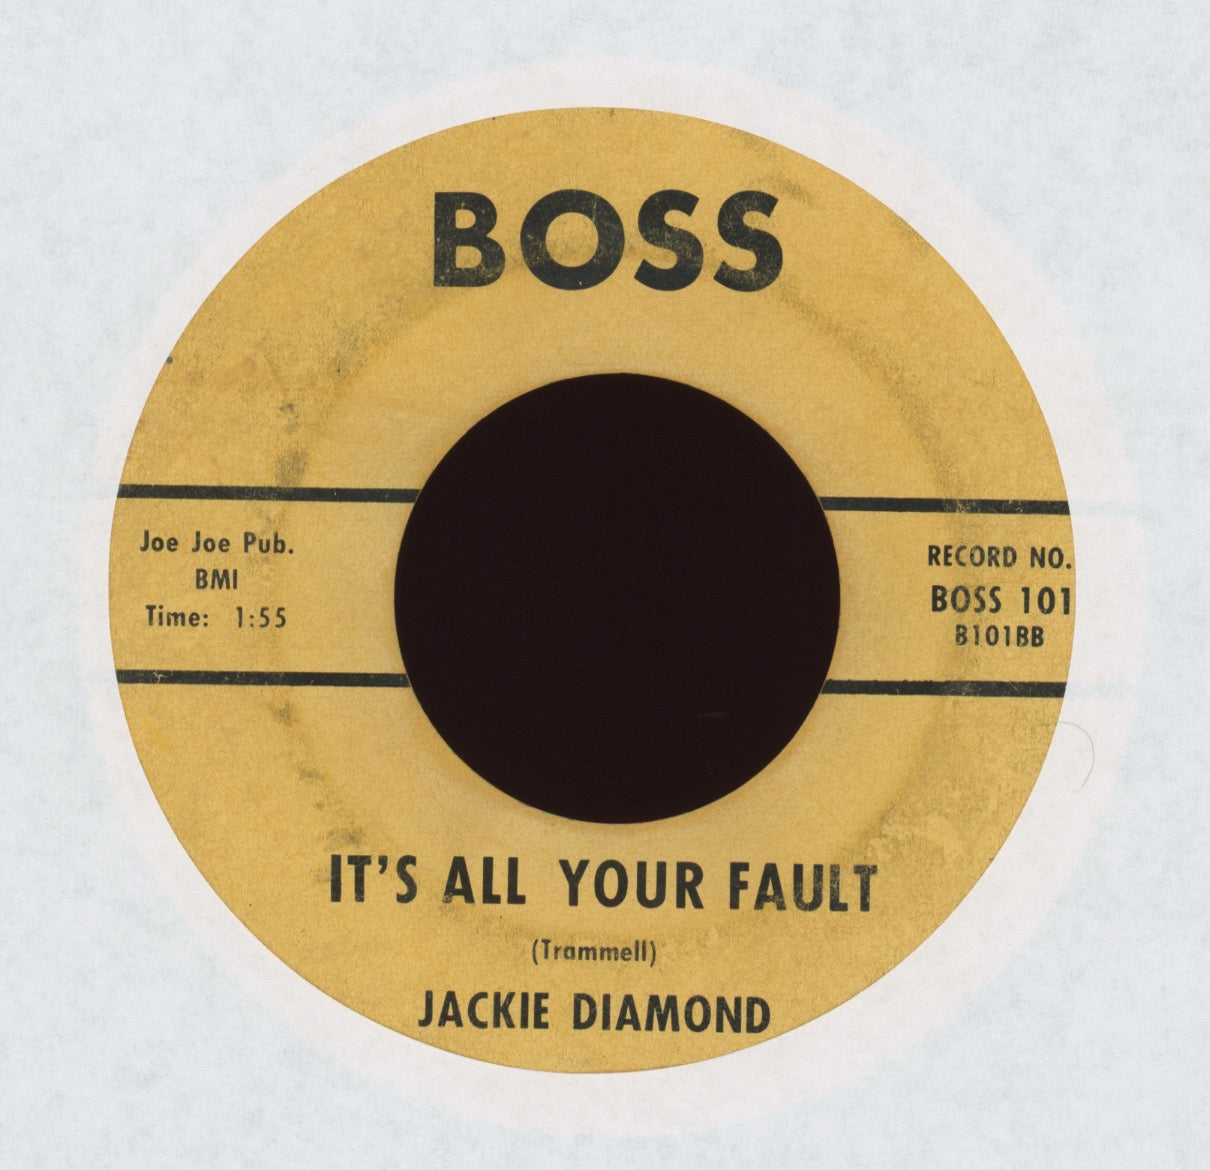 Jackie Diamond - It's All Your Fault on Boss